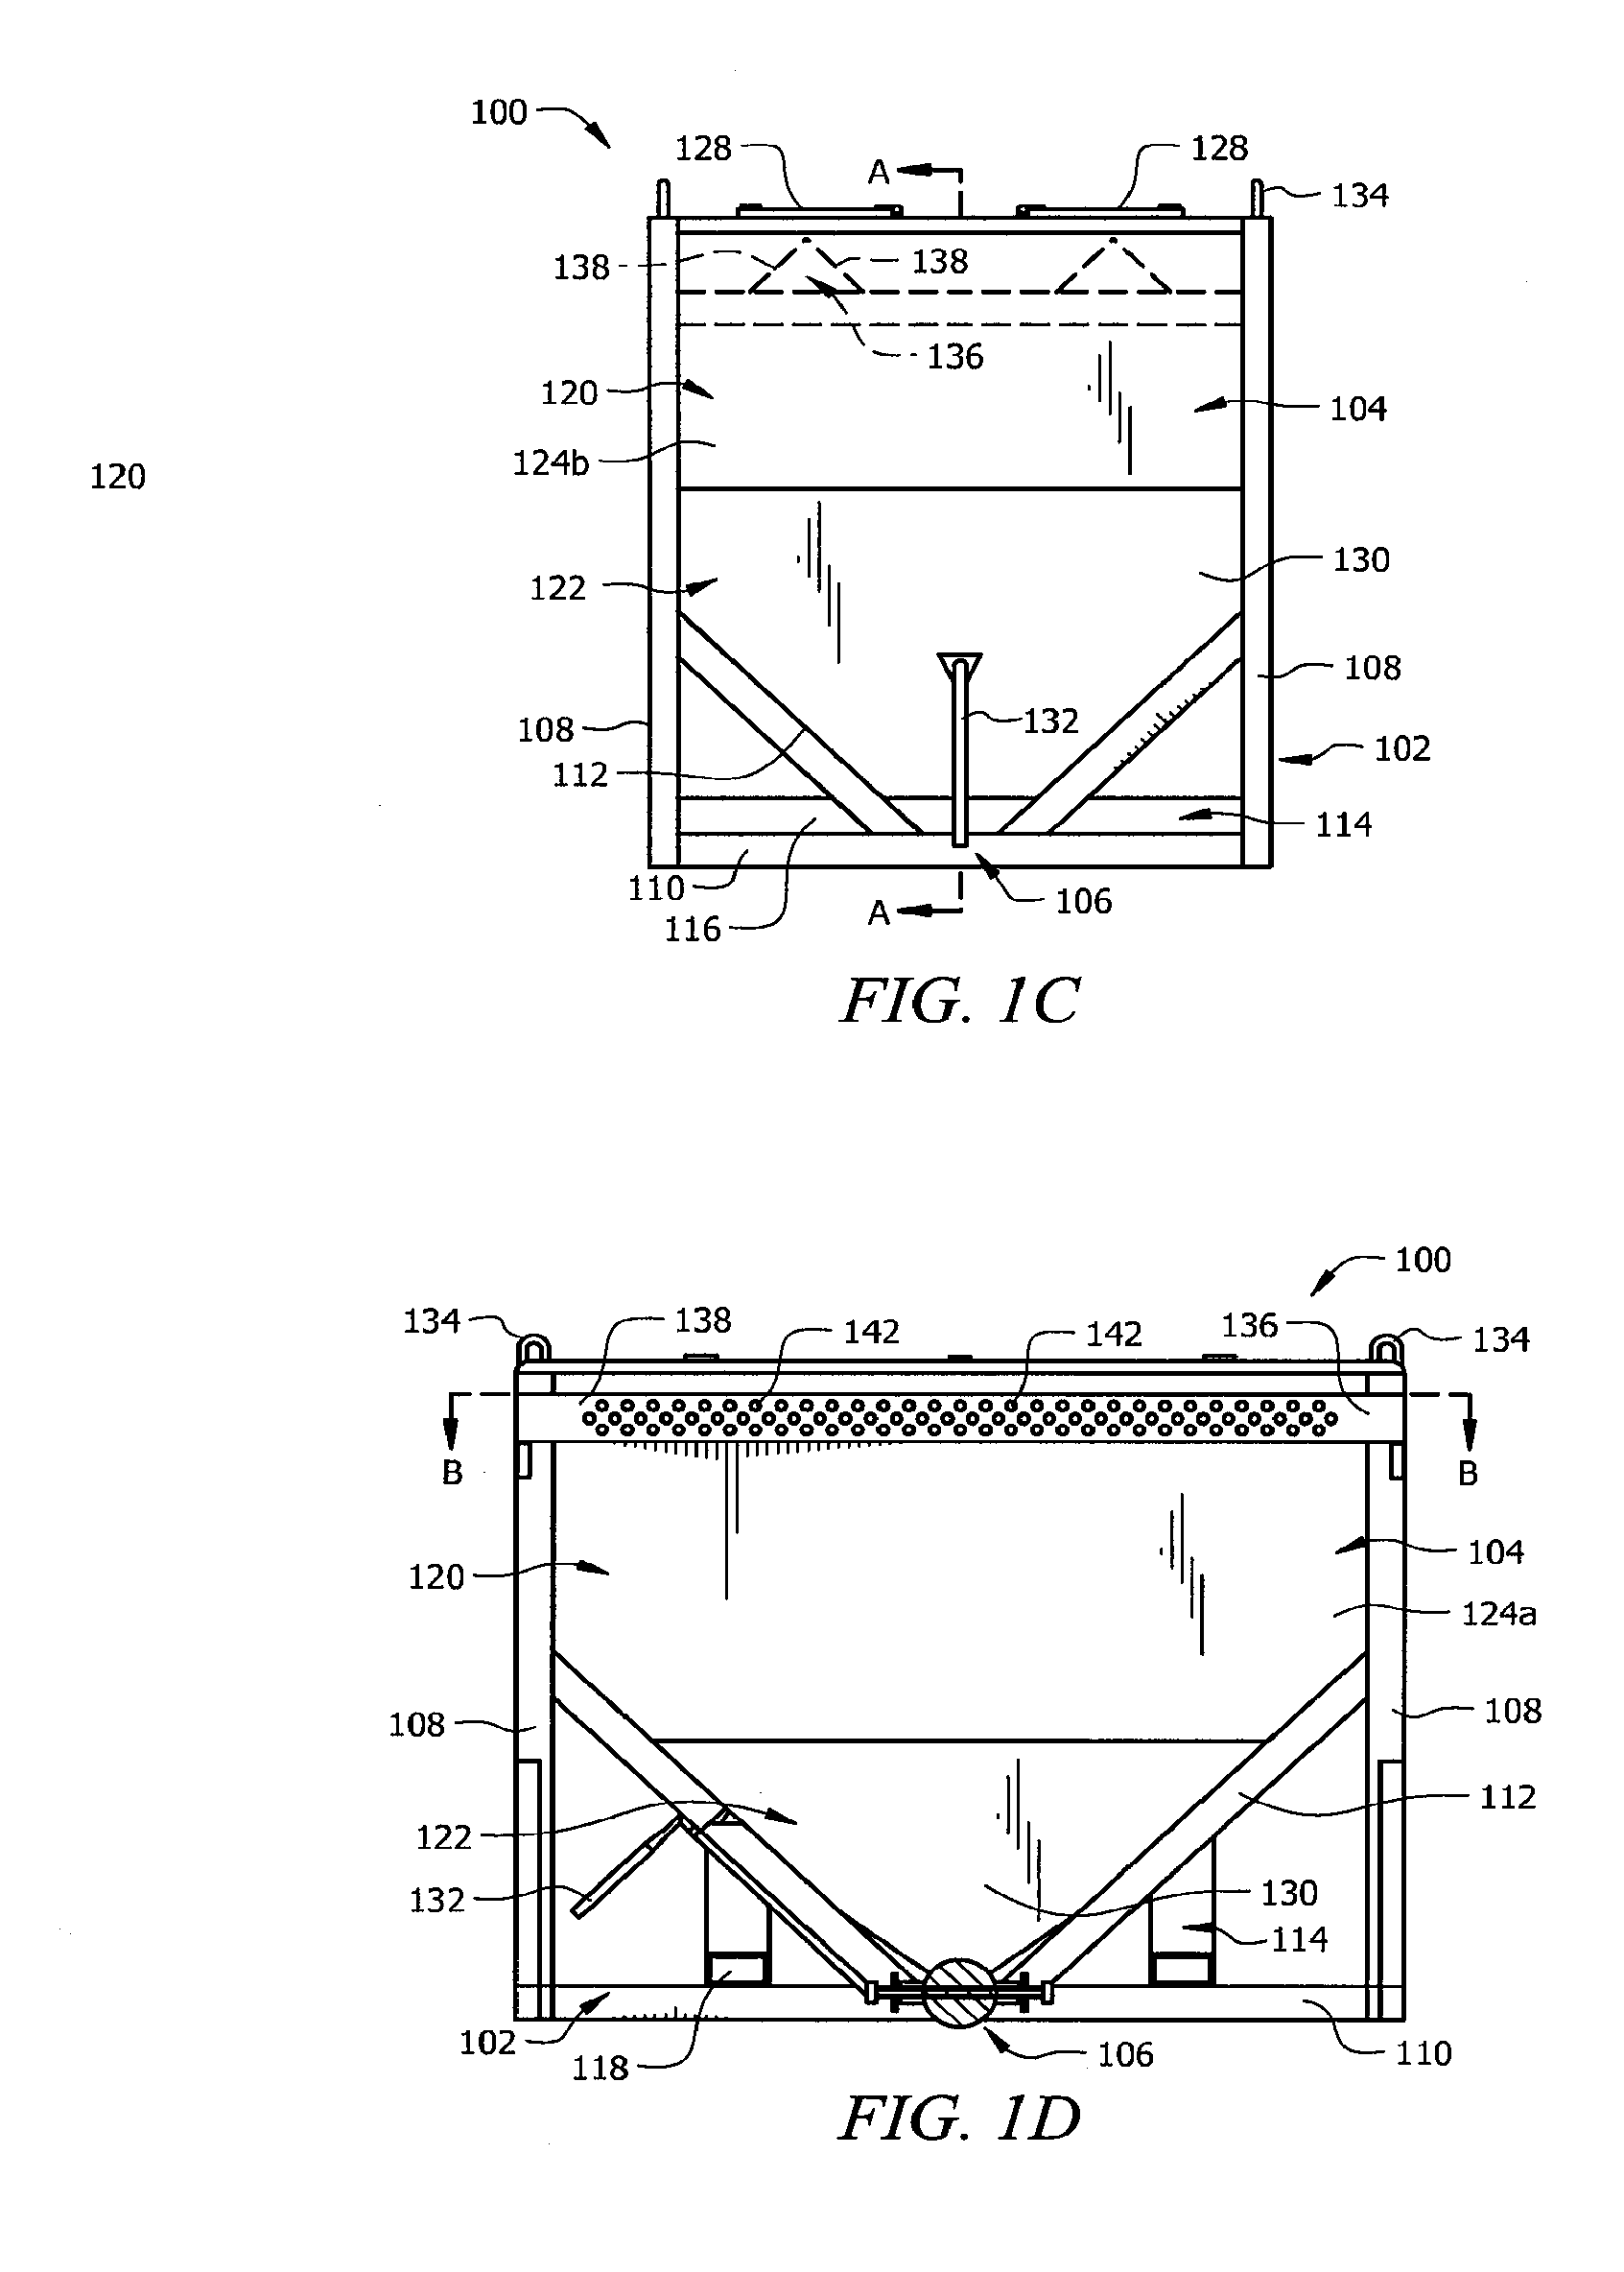 Systems and methods for bulk material storage and/or transport